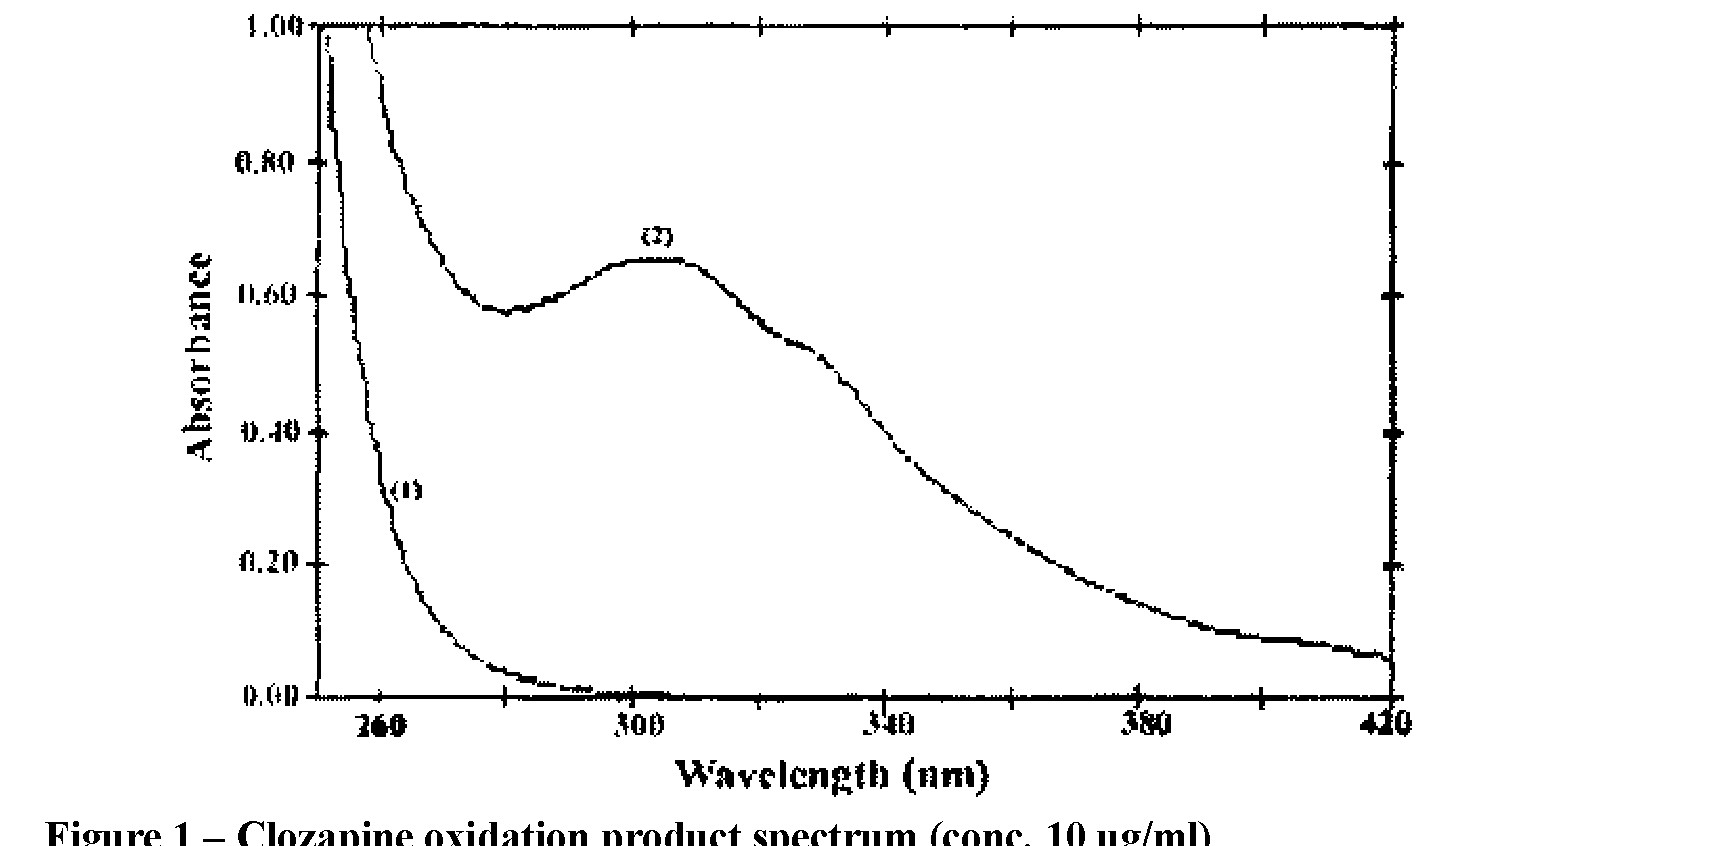 Determination of hydrolisis products of clozapine in biomaterial by uv-spectrophotometry method